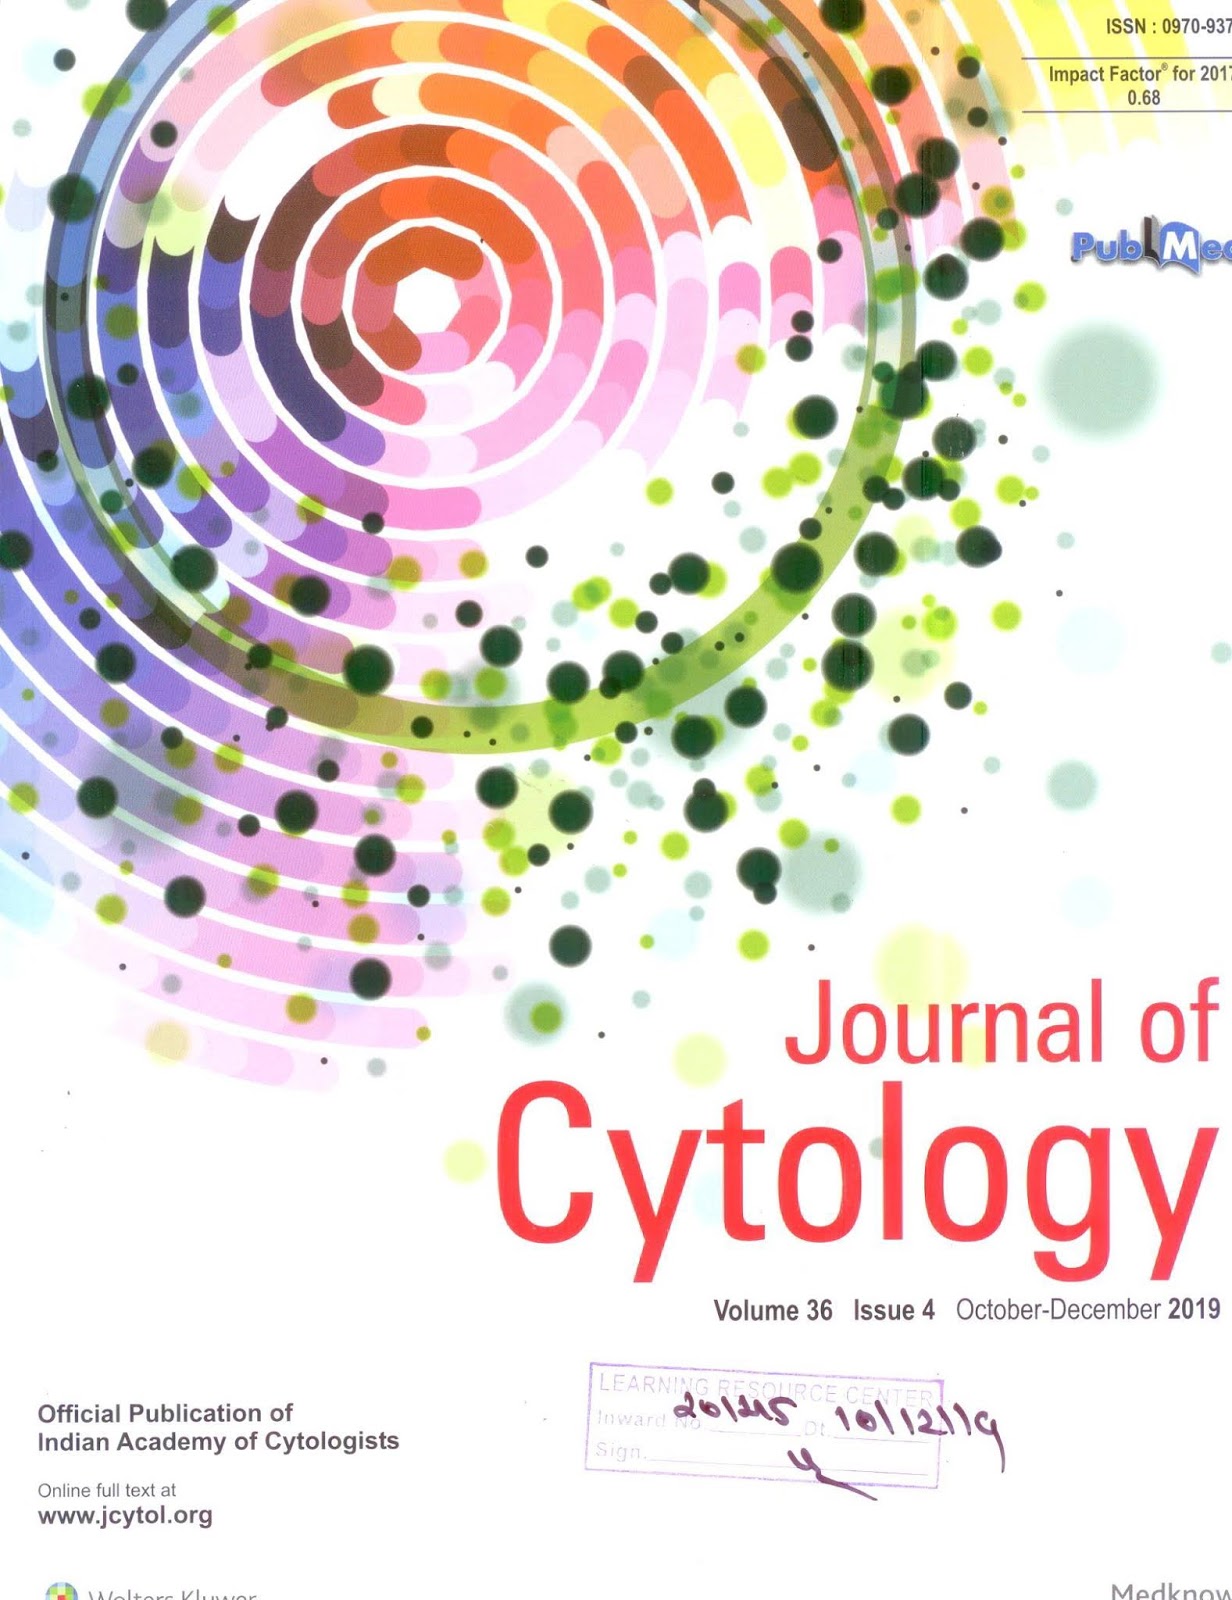 http://www.jcytol.org/showBackIssue.asp?issn=0970-9371;year=2019;volume=36;issue=4;month=October-December